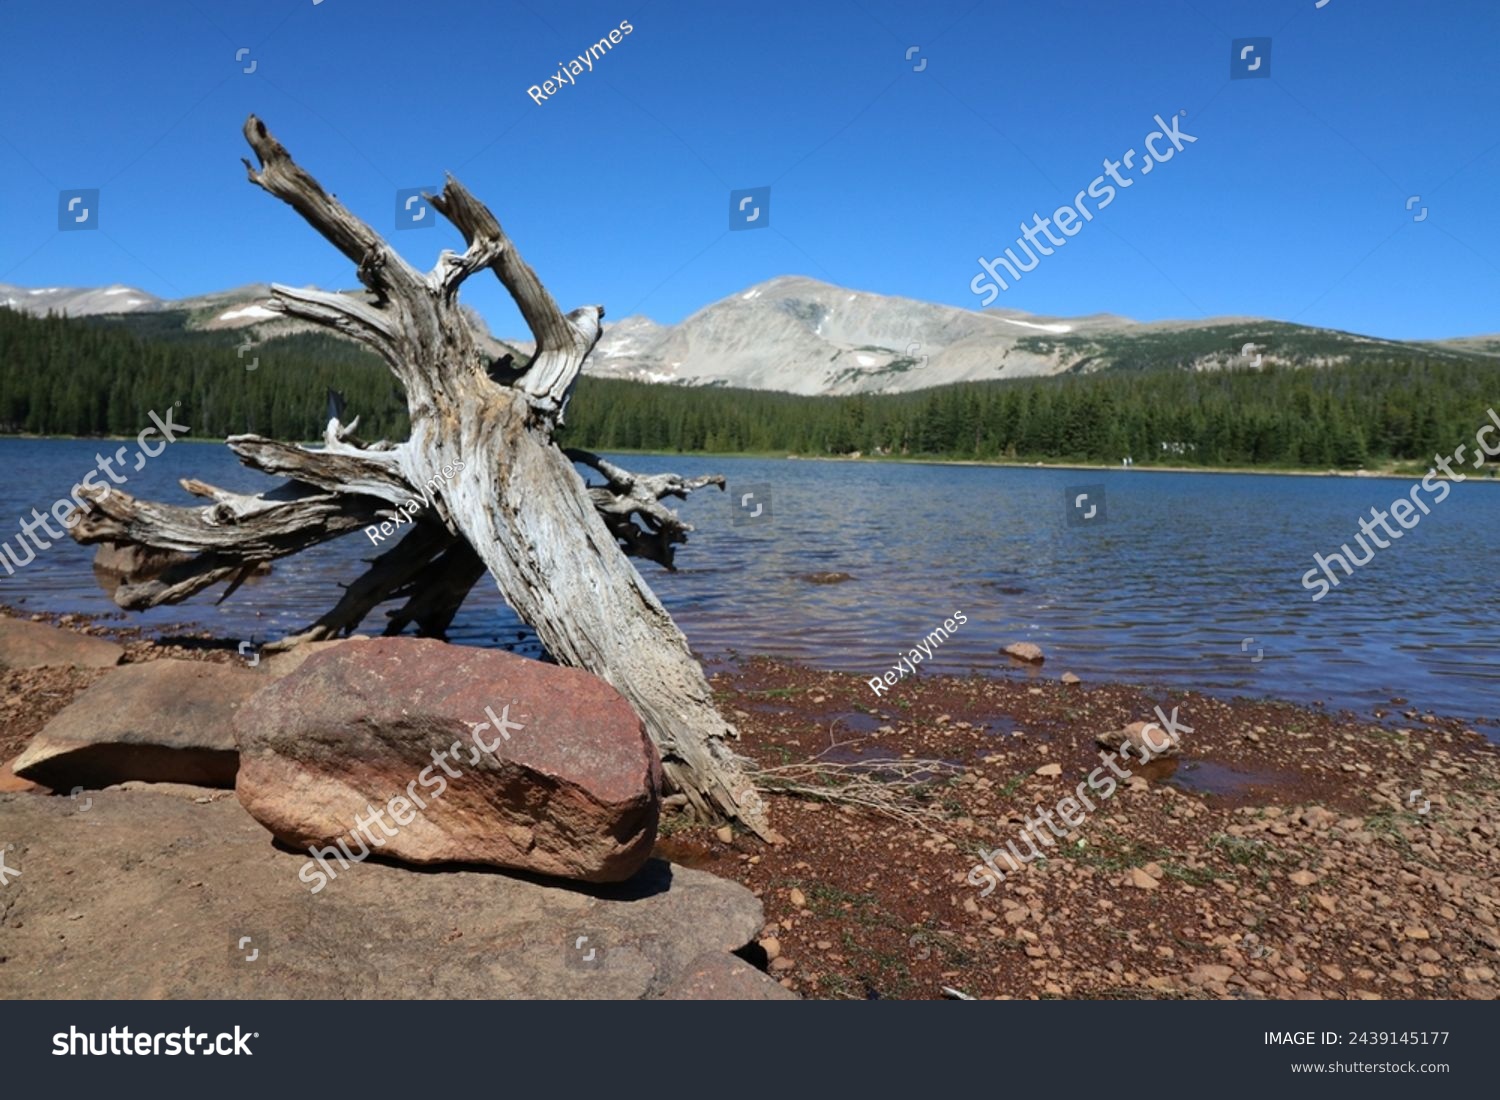 Brainard Lake in Colorado's Indian Peaks Wilderness.  Blue sky, grassy shores and pine trees along shore in Colorado high country.  Rustic weathered stump on shoreline with small boulder. #2439145177